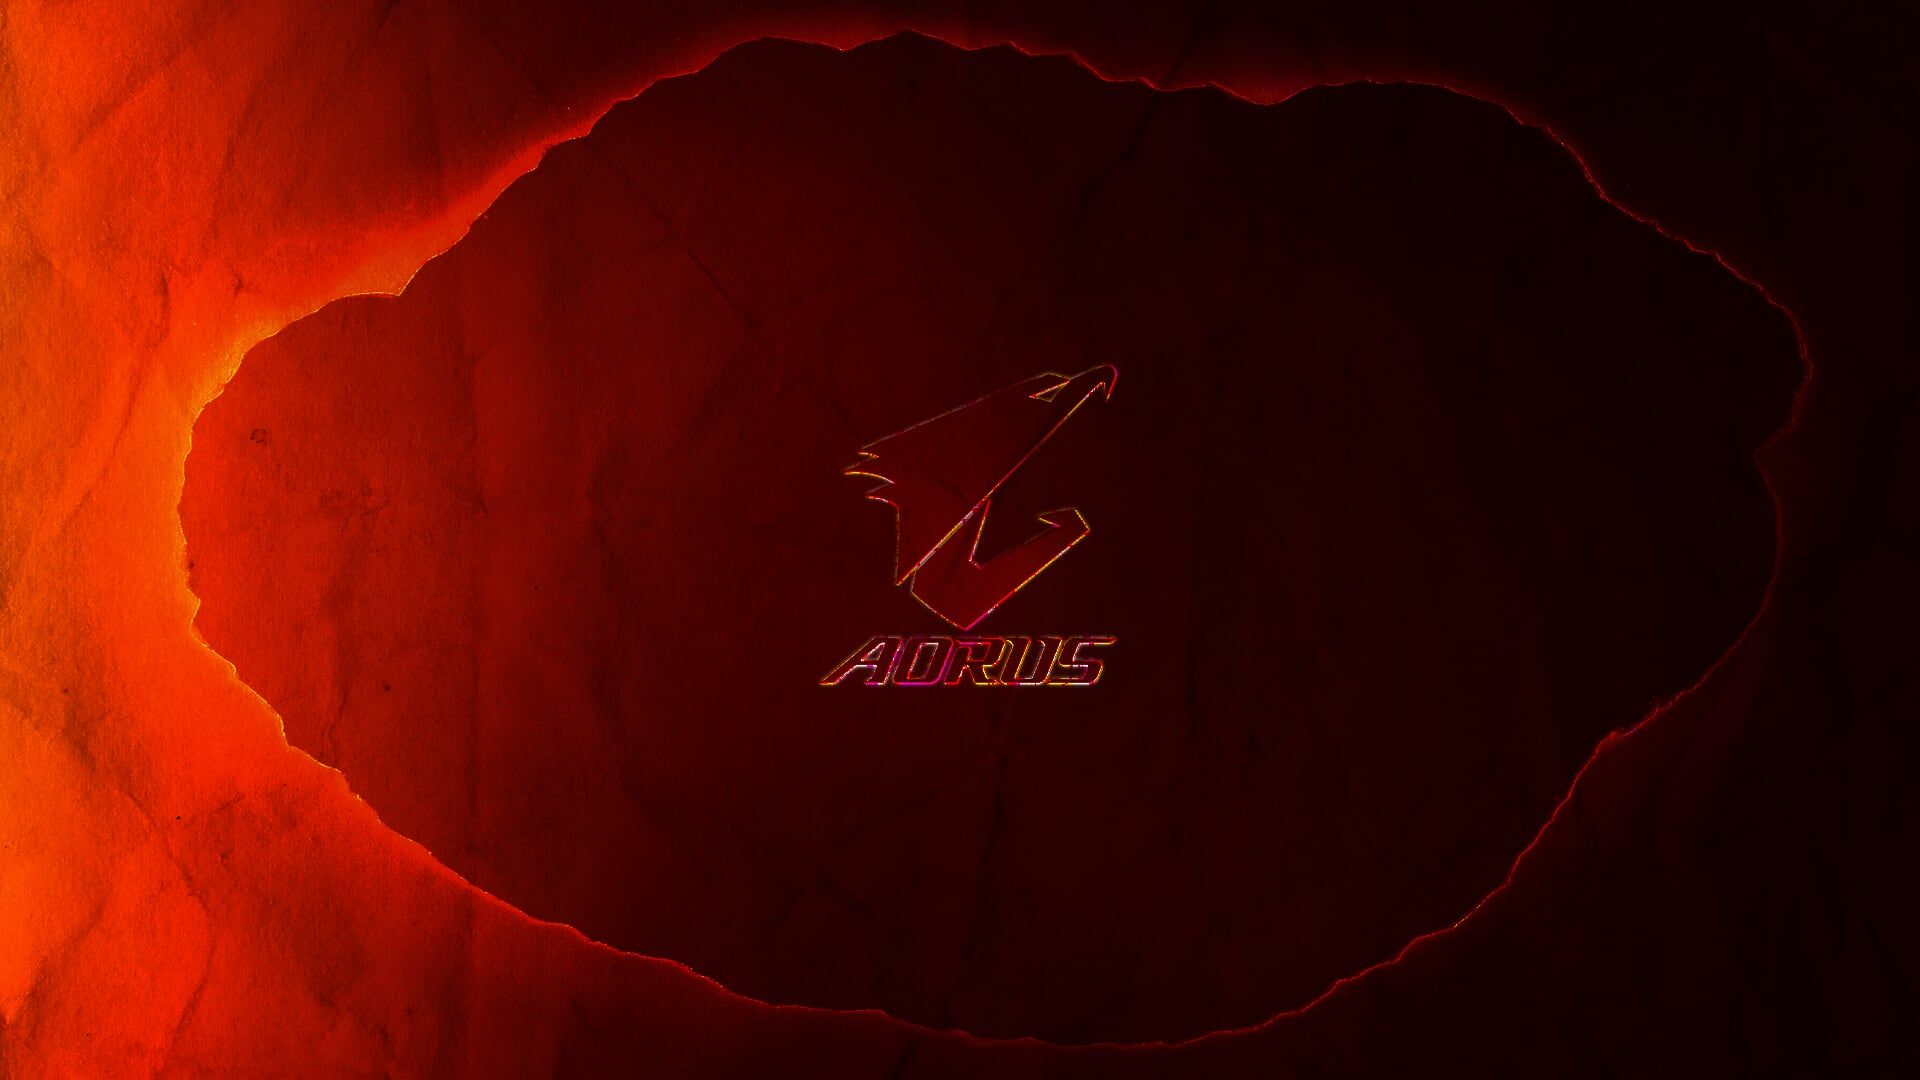 AORUS. Enthusiasts' Choice for PC gaming and esports